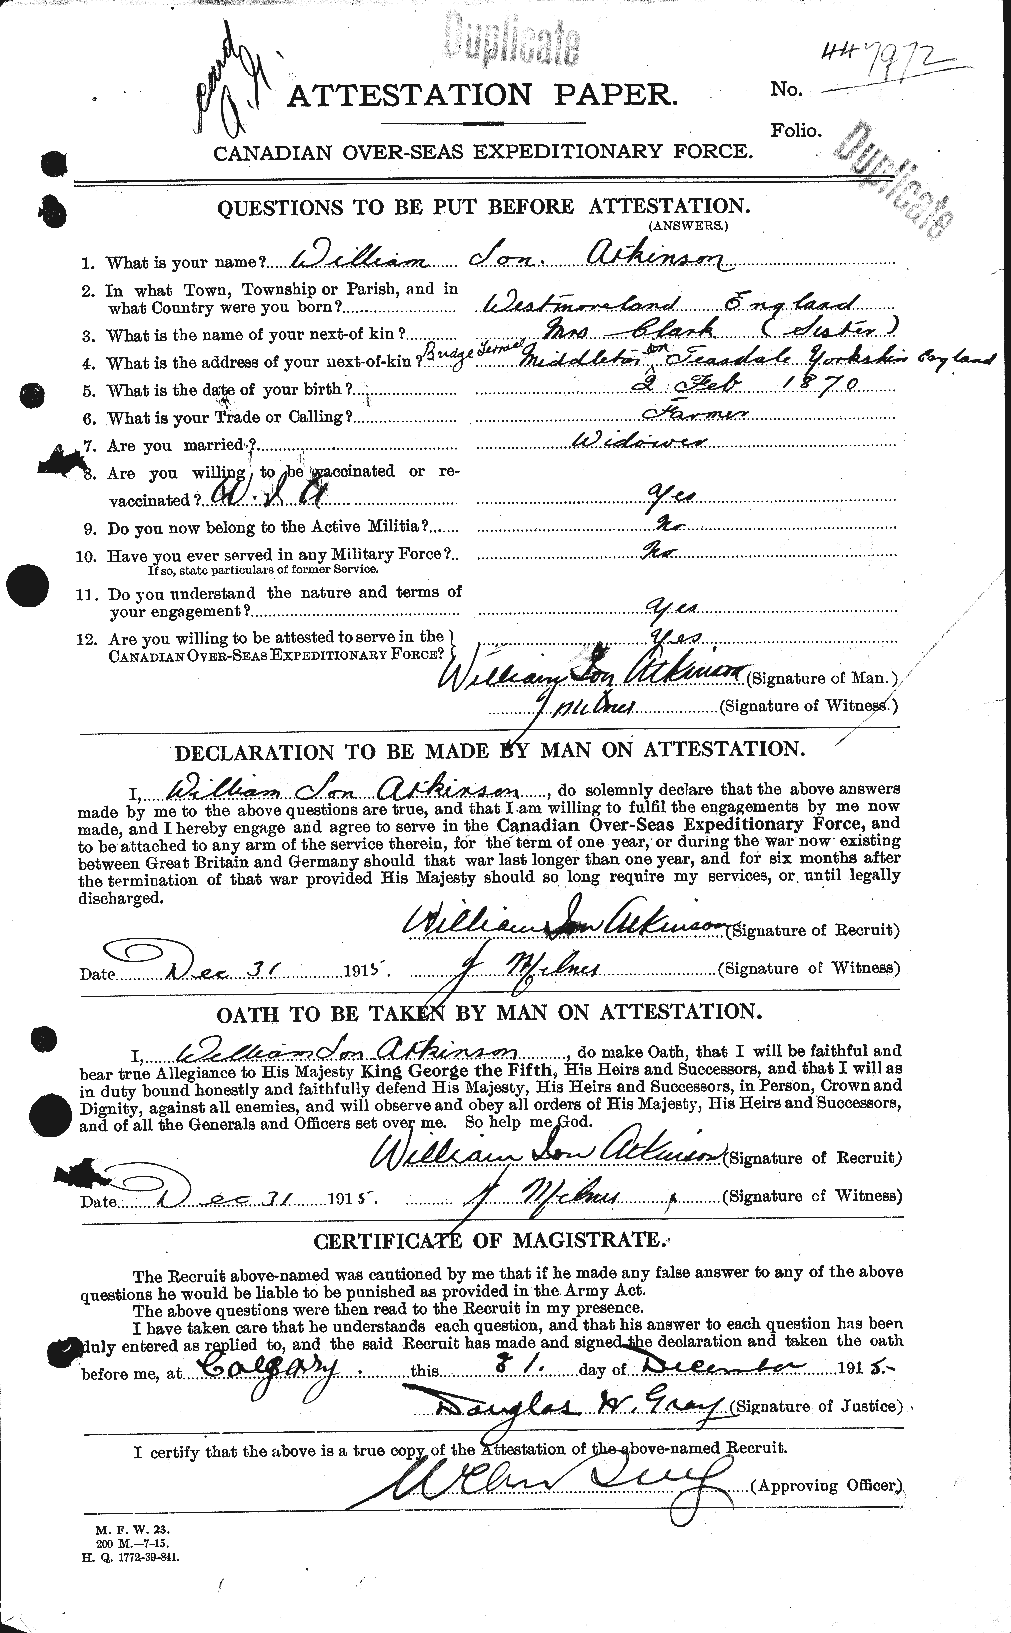 Personnel Records of the First World War - CEF 224173a